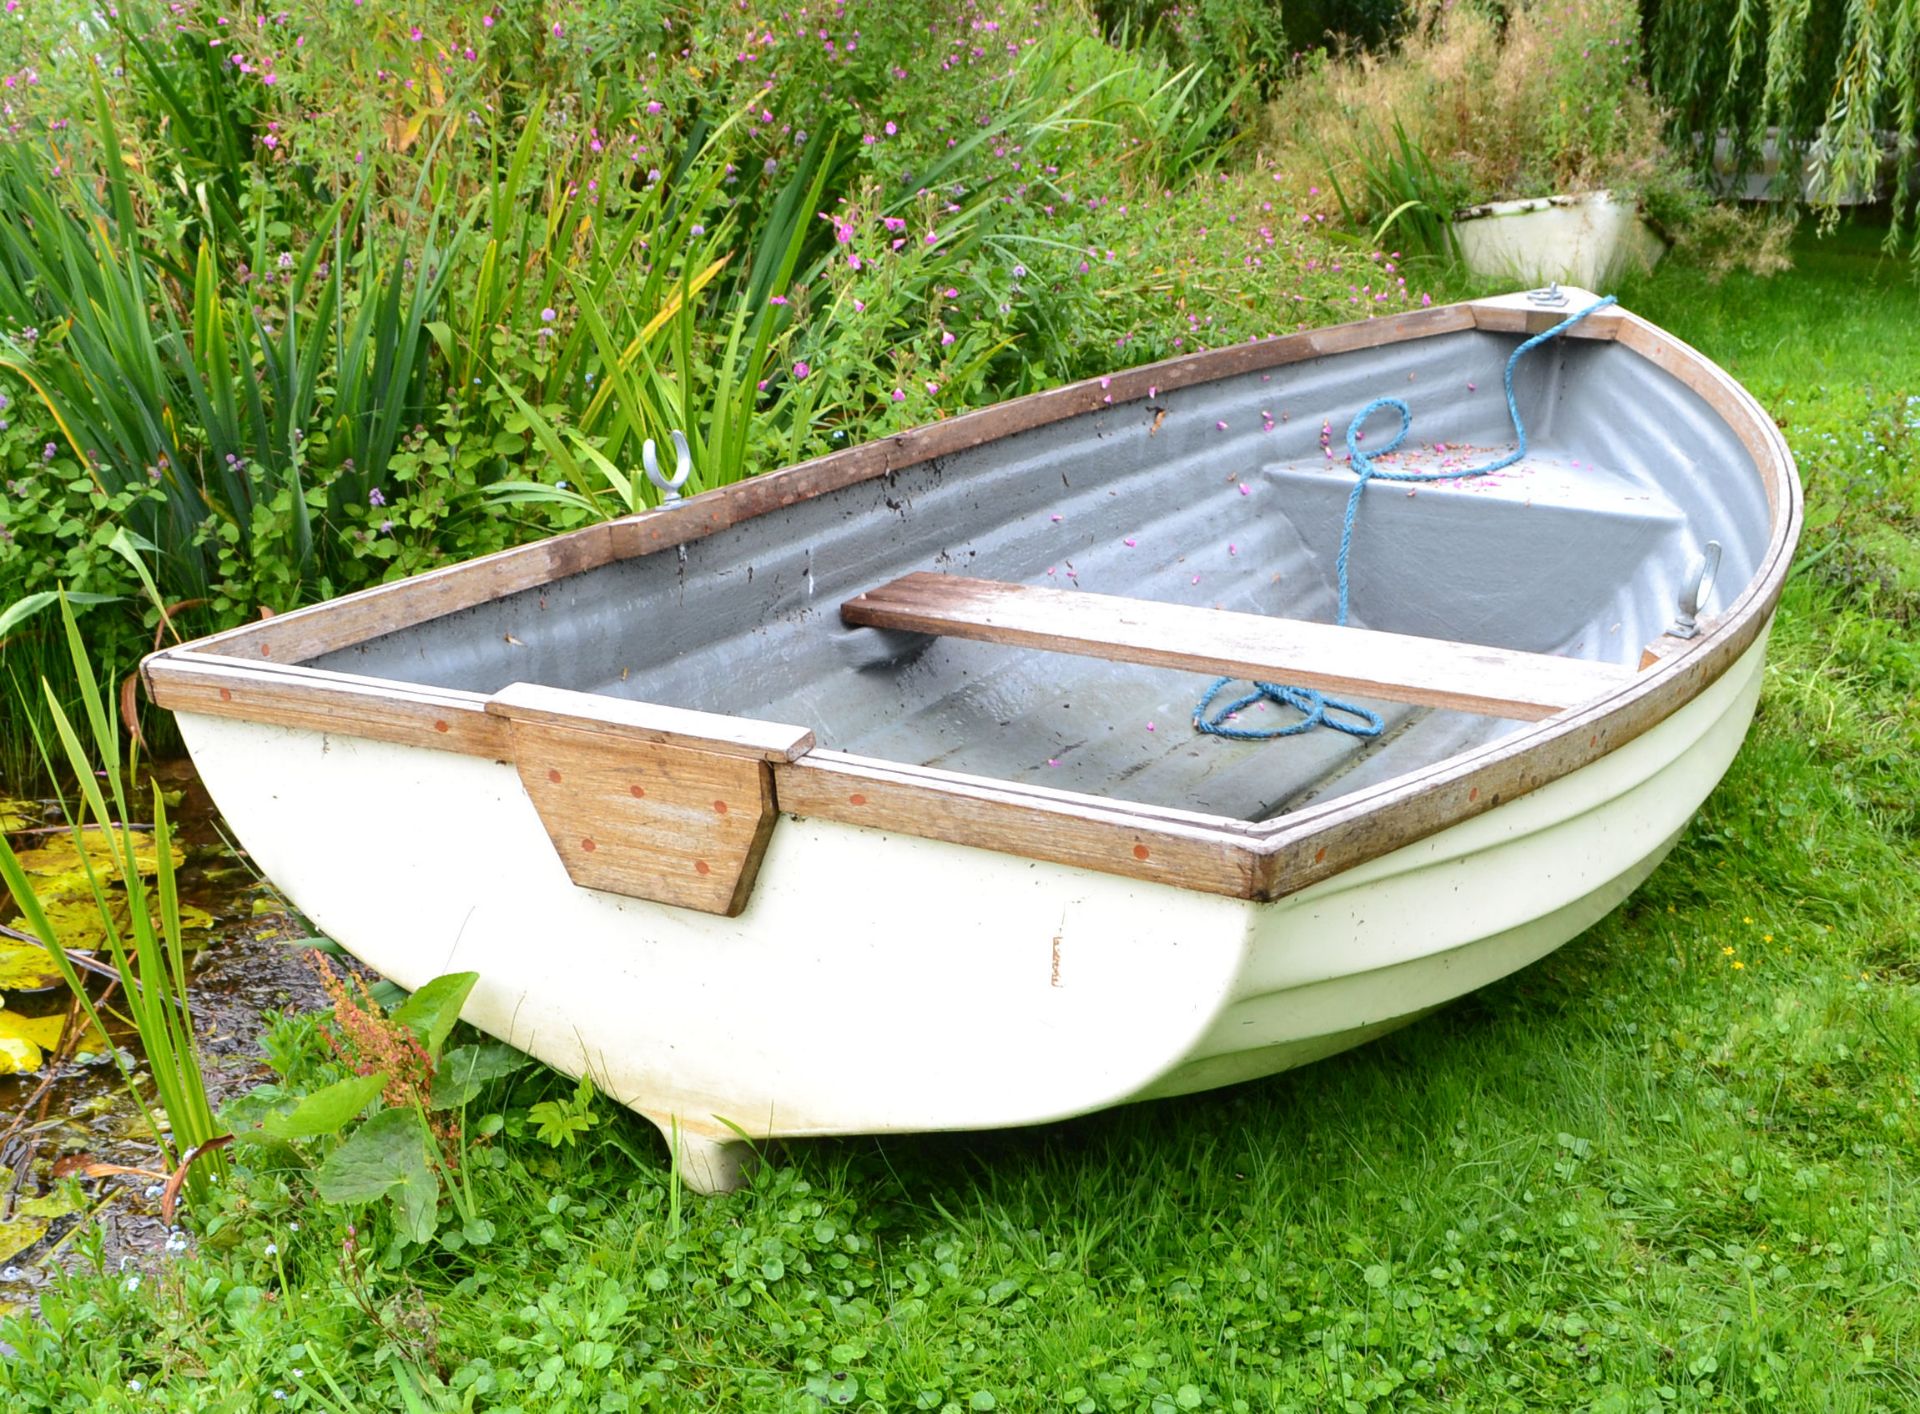 1 x Clovelly 290 Glass Fibre Rowing Boat - 240Kg Maximum Load - CL226 - Location: Knutsford WA16 - Image 7 of 15